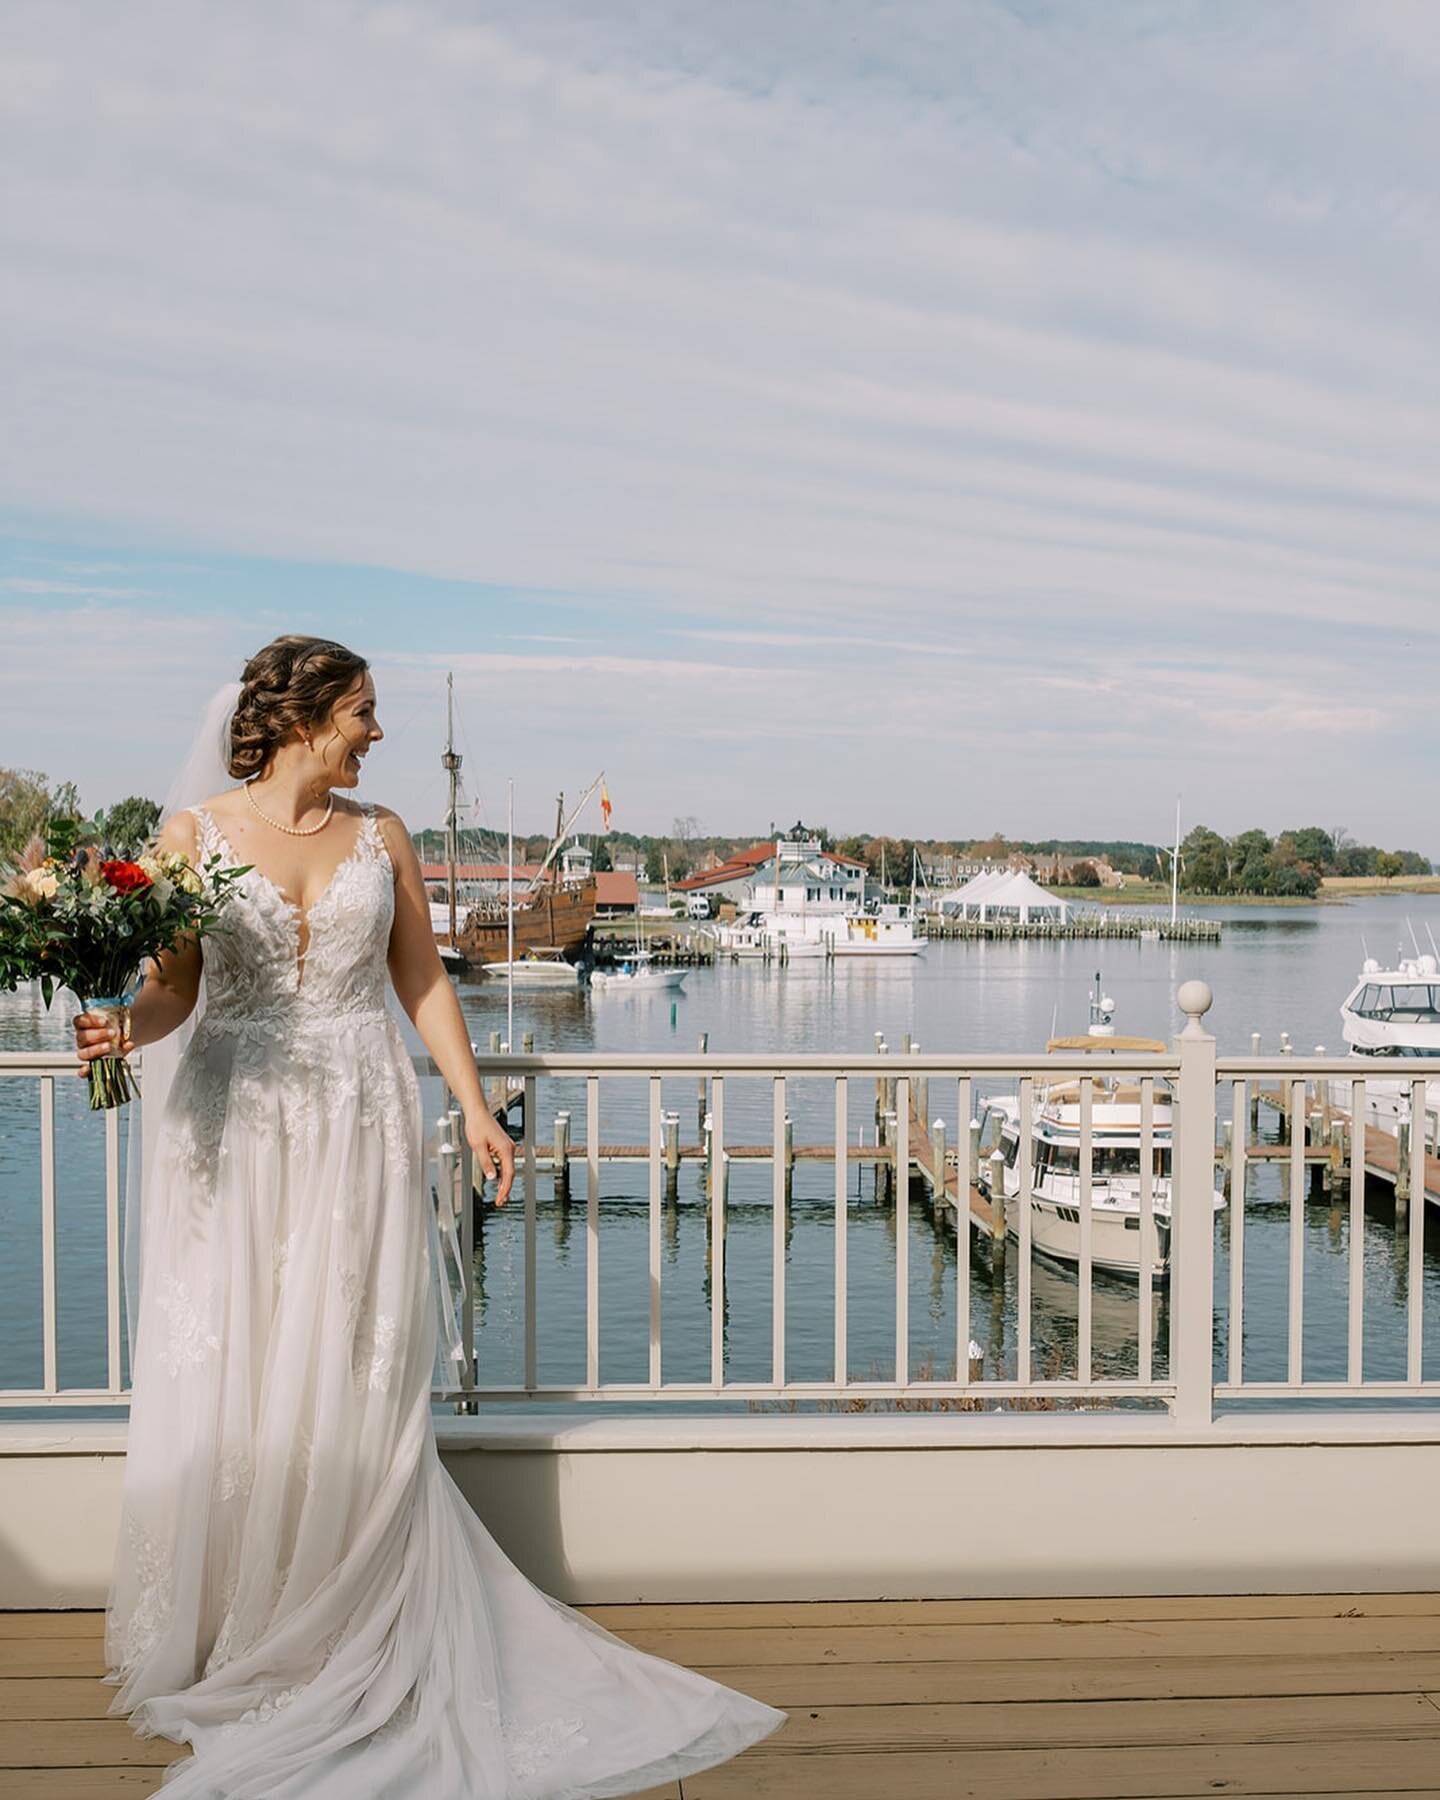 The bride getting the best view of @chesapeakemaritime from the @saintmichaelsharbourinn The perfect fall day for our last wedding of the season! Photography: @anendlesspursuit Planner: @ludicevents Rentals: @easternshoretents &amp; @prettylittlewedd